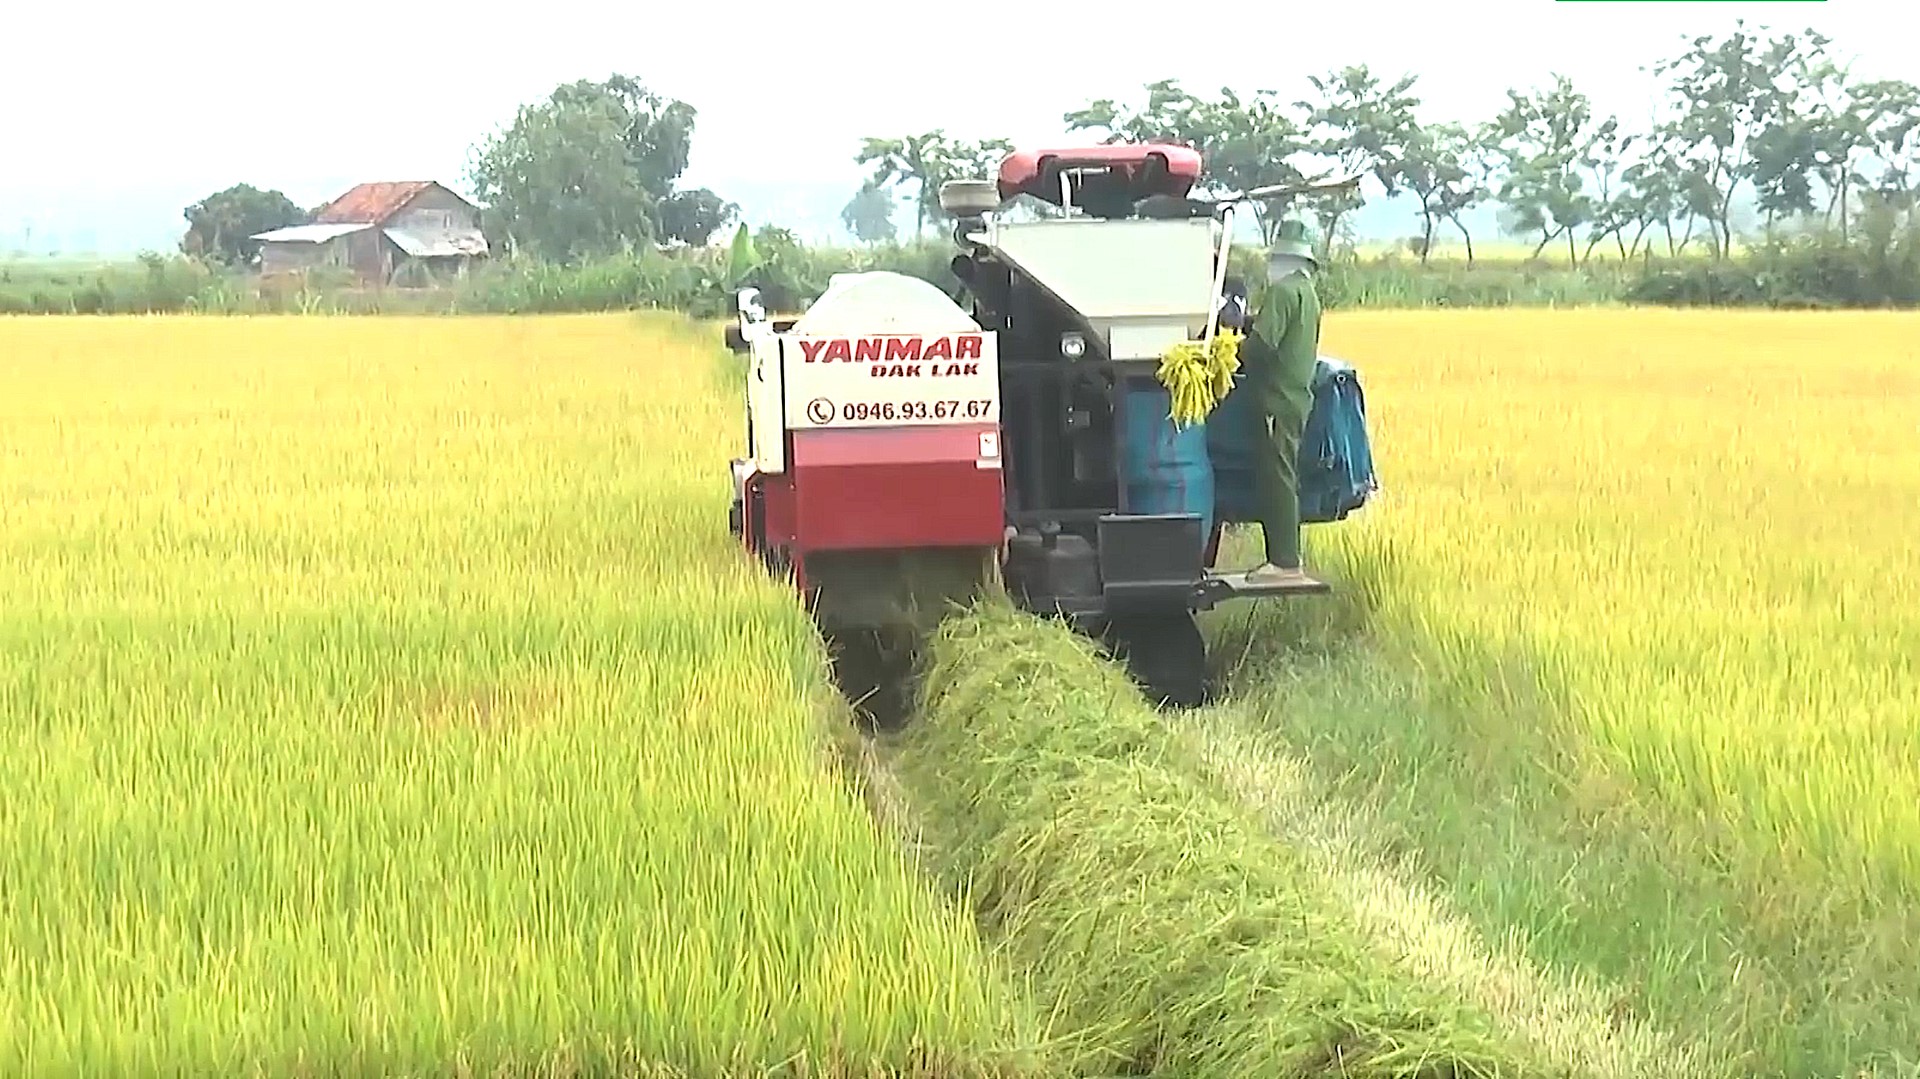 The yield of the ST rice variety grown in Buon Choah is even higher than in the Southwest granary. Photo: Hong Thuy.